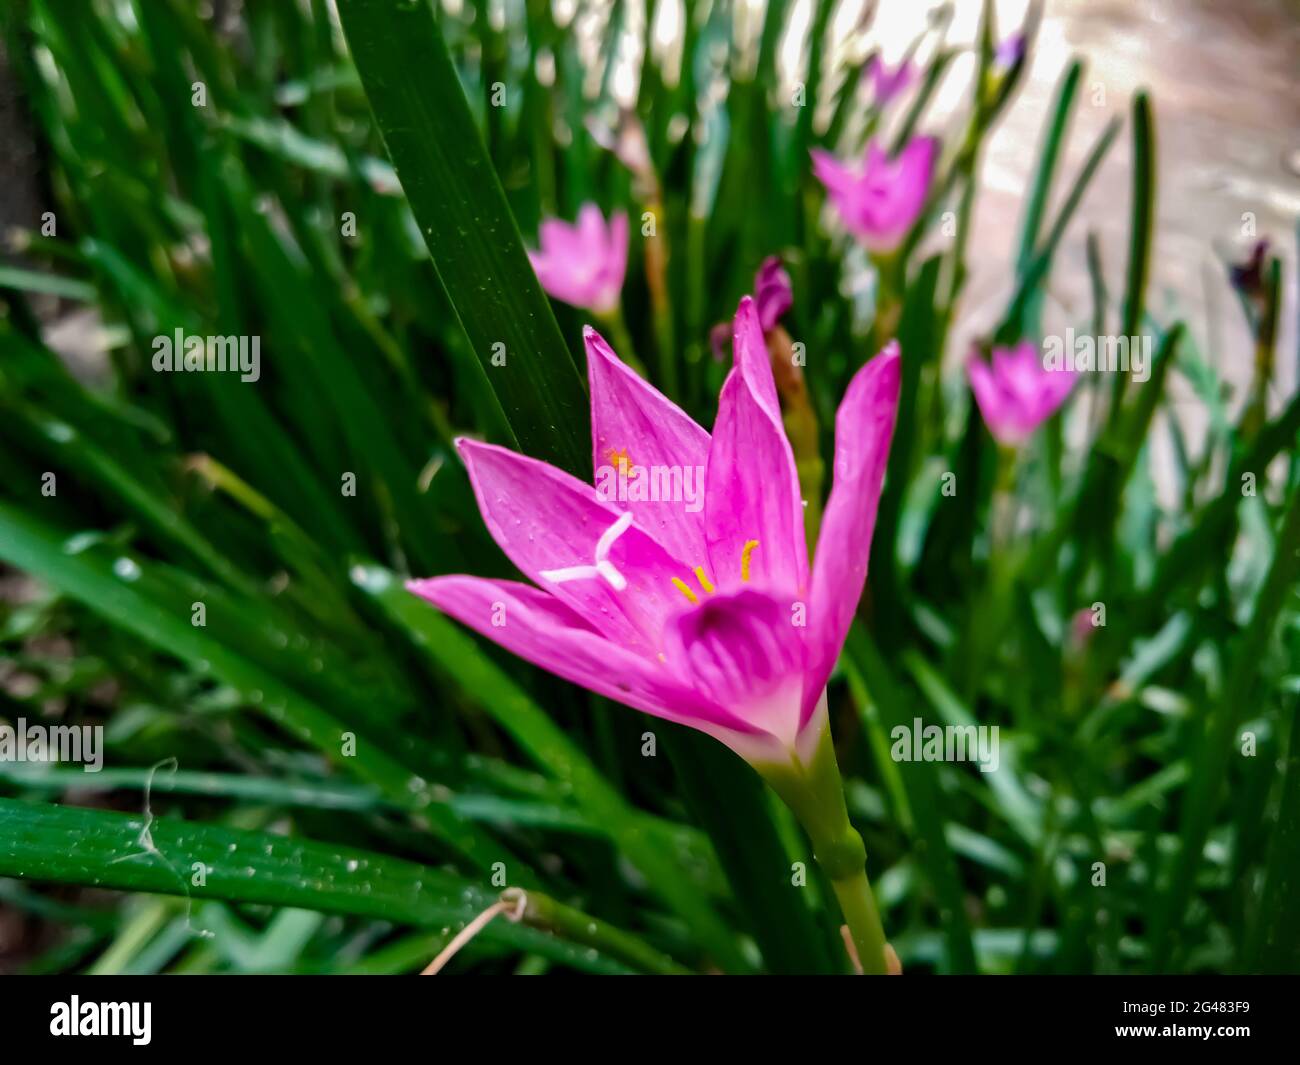 Purple flower of a rosy rain lily growing in the garden Stock Photo